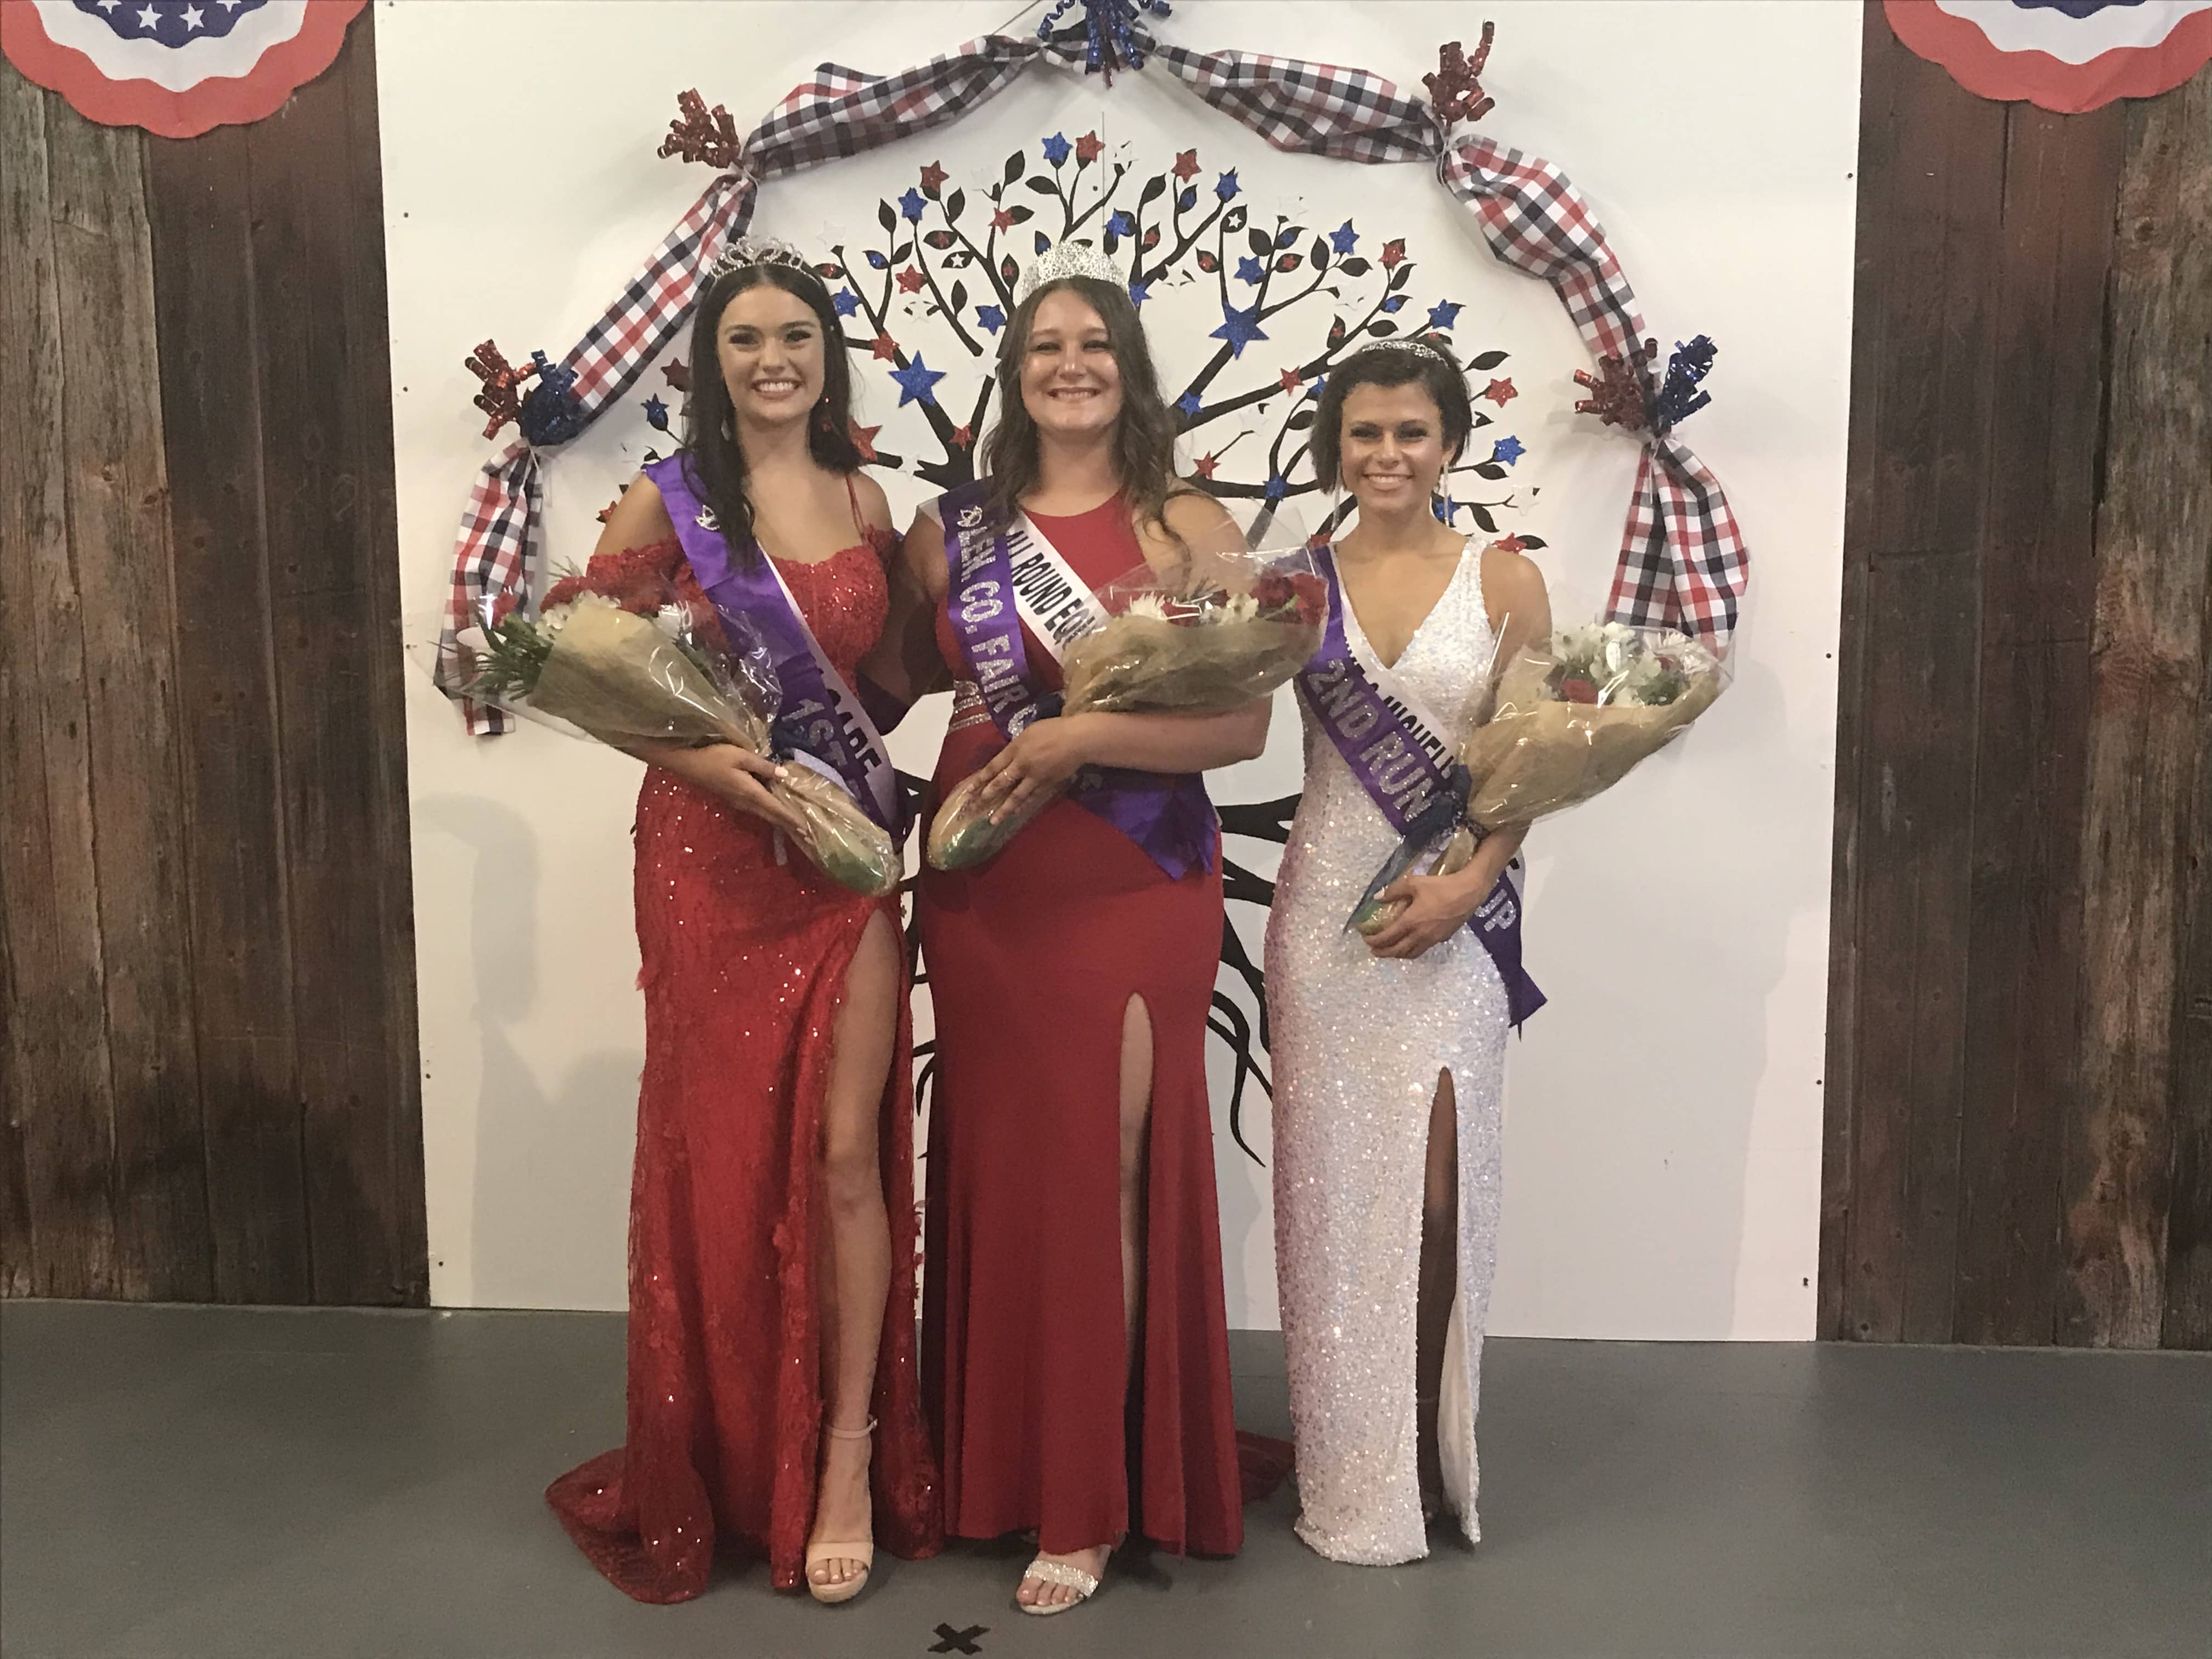 Our Fair Queen Kindell Covey Crowned at the Lenawee County Fair WLEN